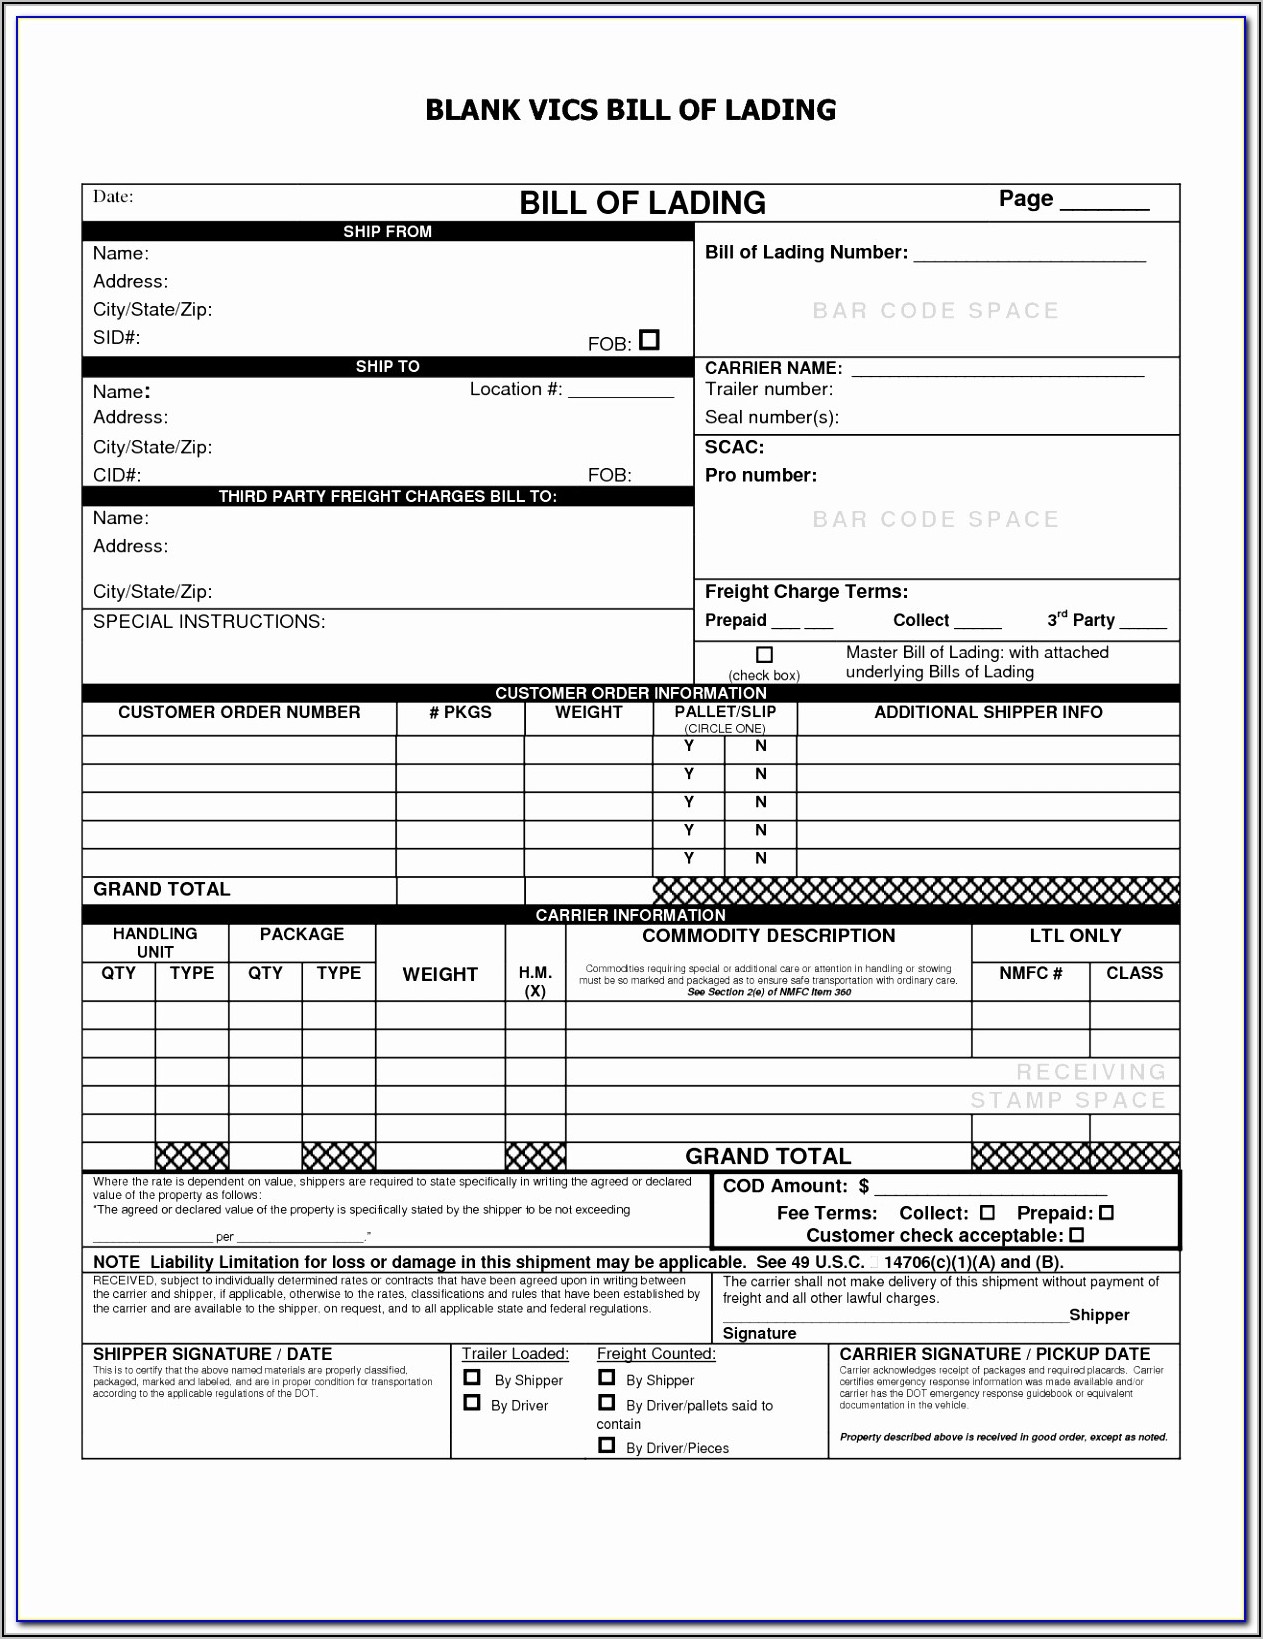 Bill Of Lading Short Form Not Negotiable Template